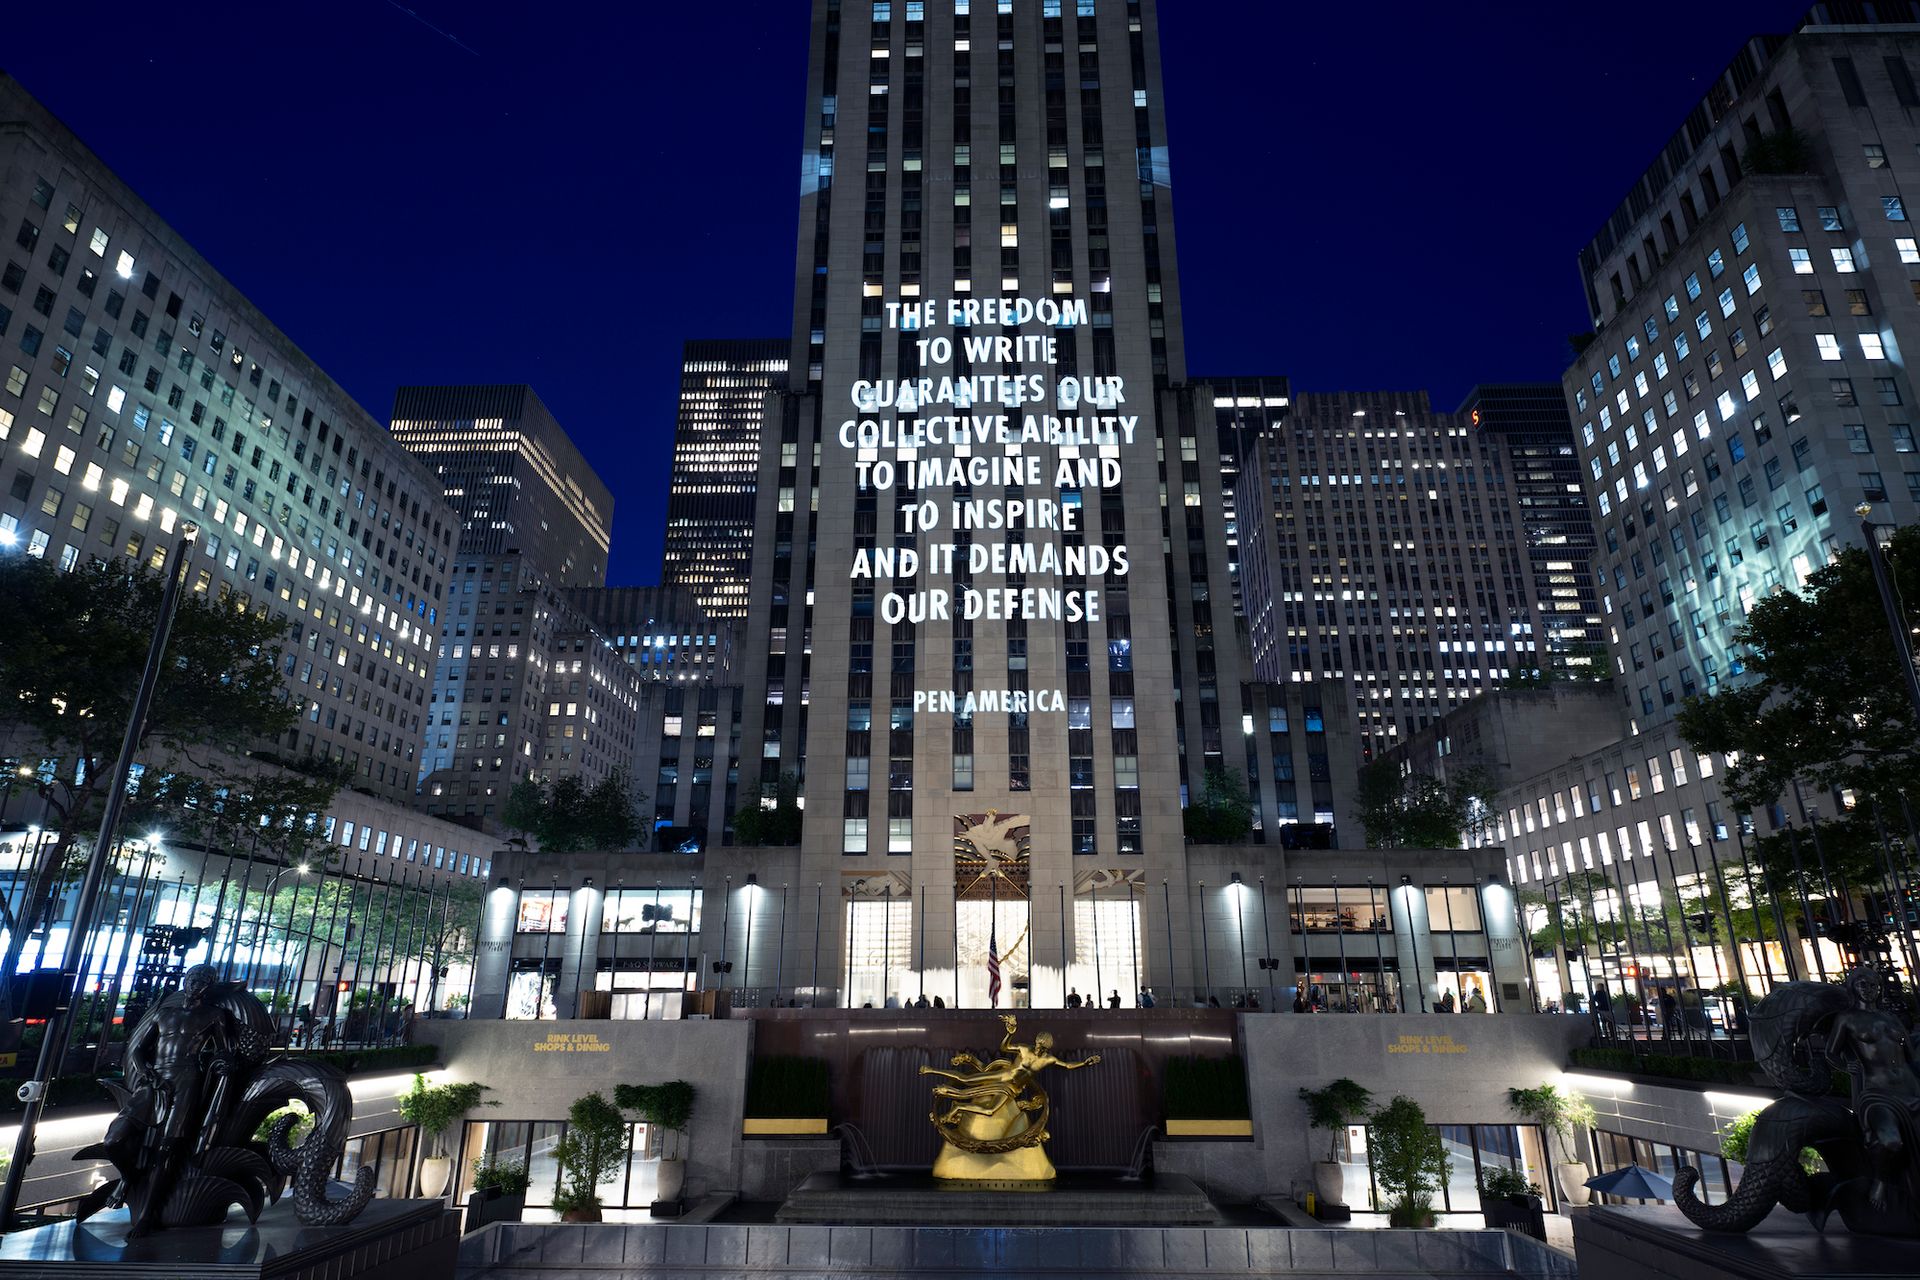 Jenny Holzer, SPEECH ITSELF, 2022. Light projection at Rockefeller Center, New York. Text: Freedom to Write Index, © 2021 by PEN America. Used with permission of PEN America. © 2022 Jenny Holzer, member Artists Rights Society (ARS), NY. Photo: Filip Wolak
